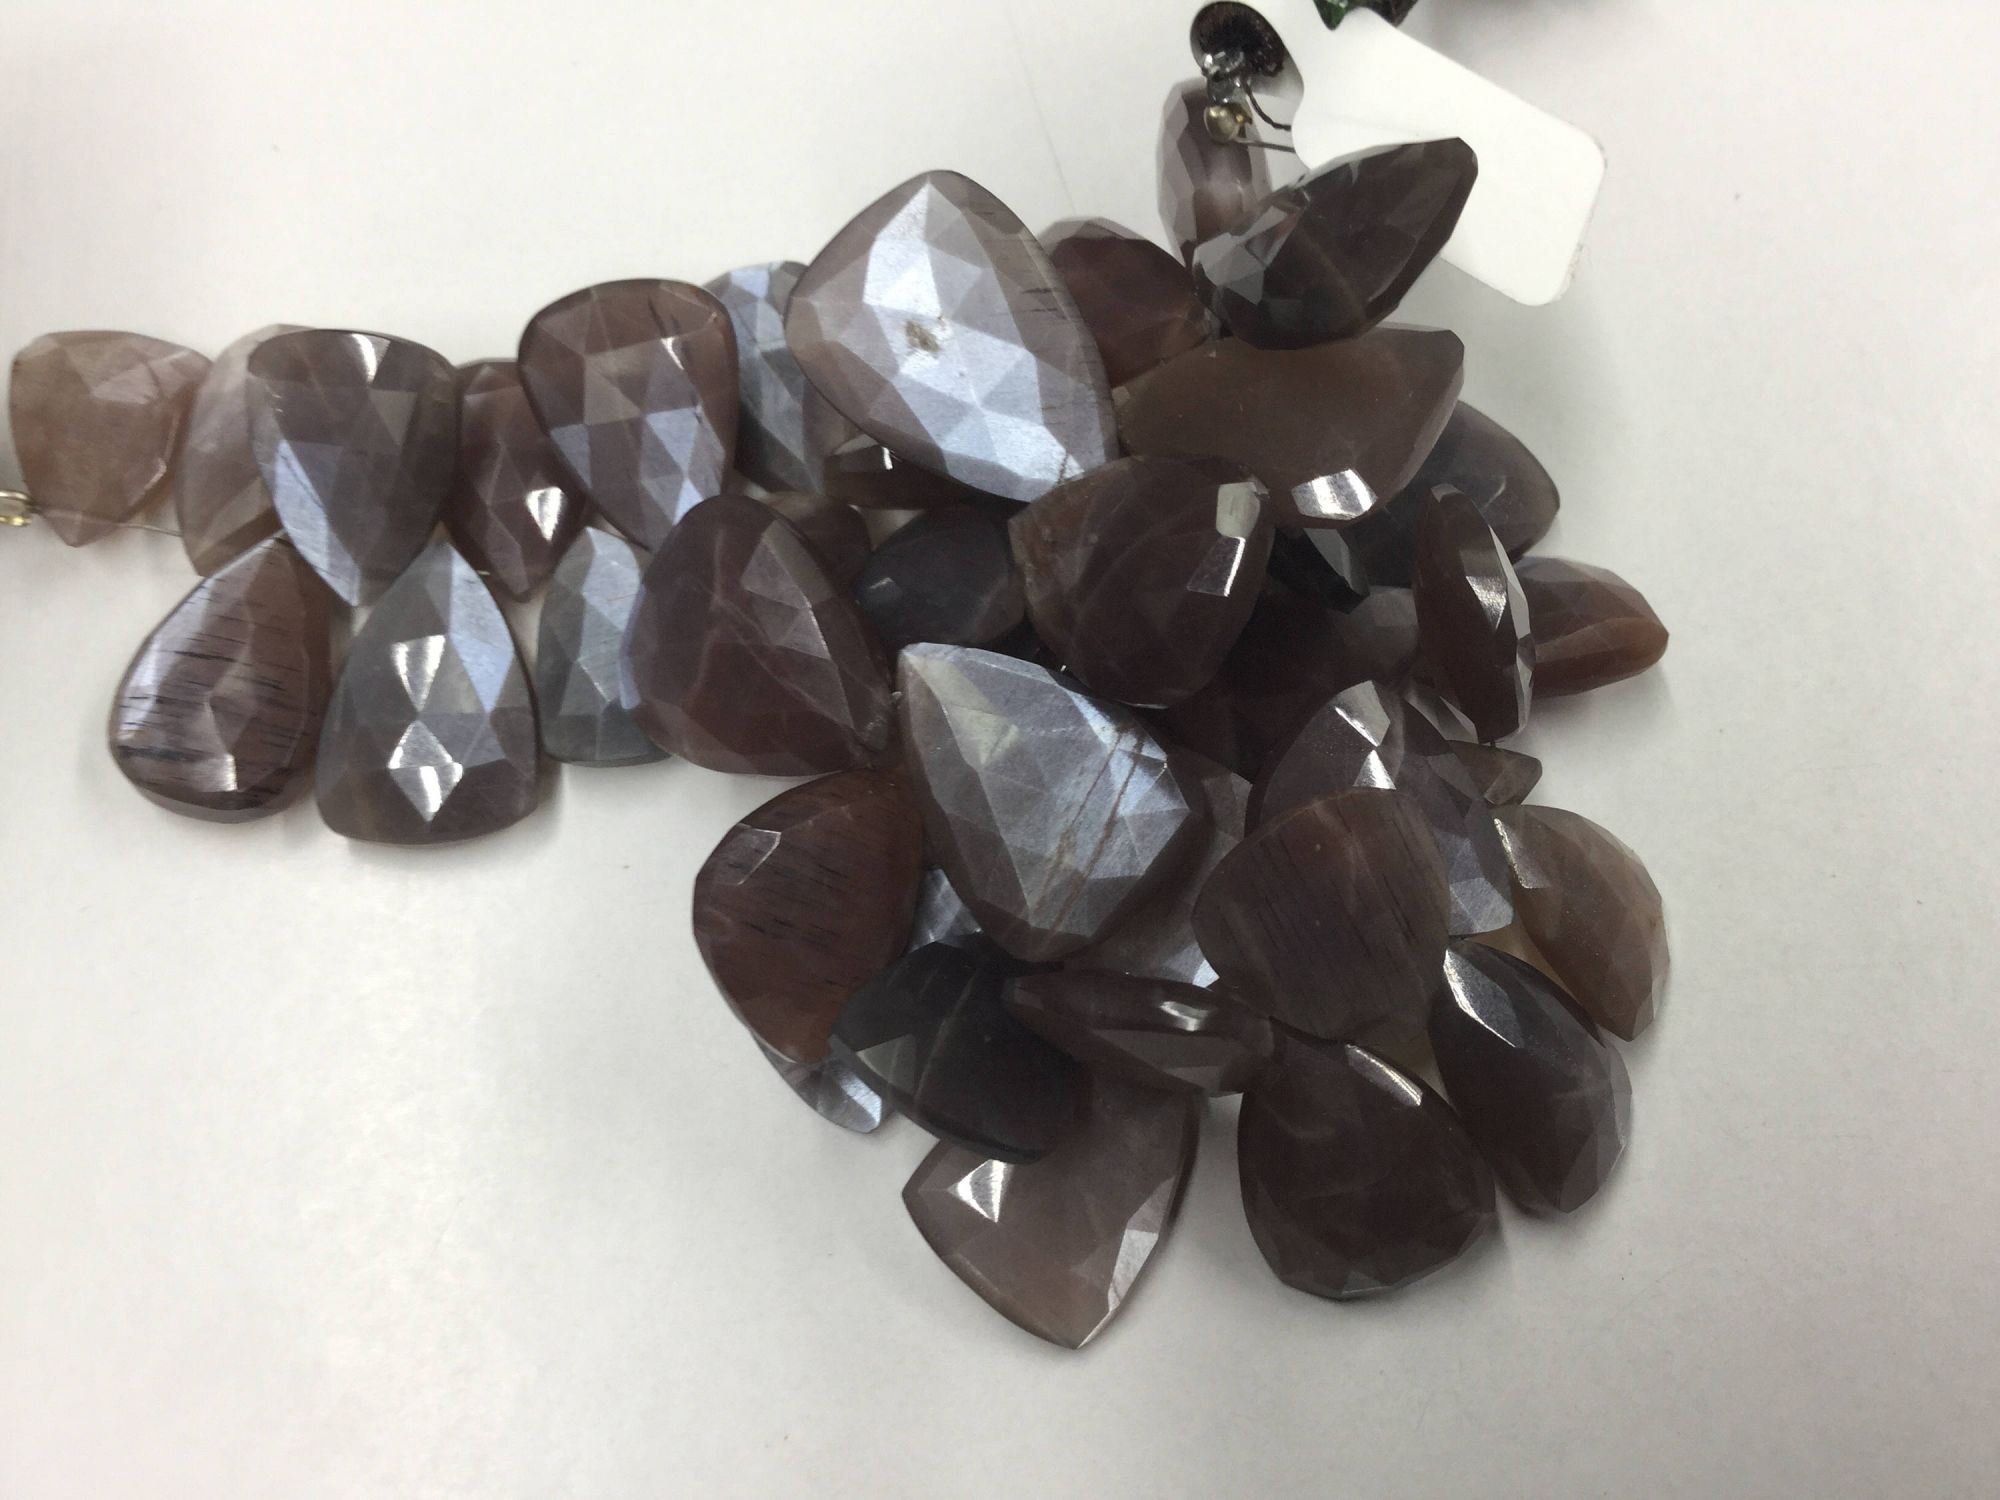 Mystic Chocolate Moonstone Fan Cut Faceted